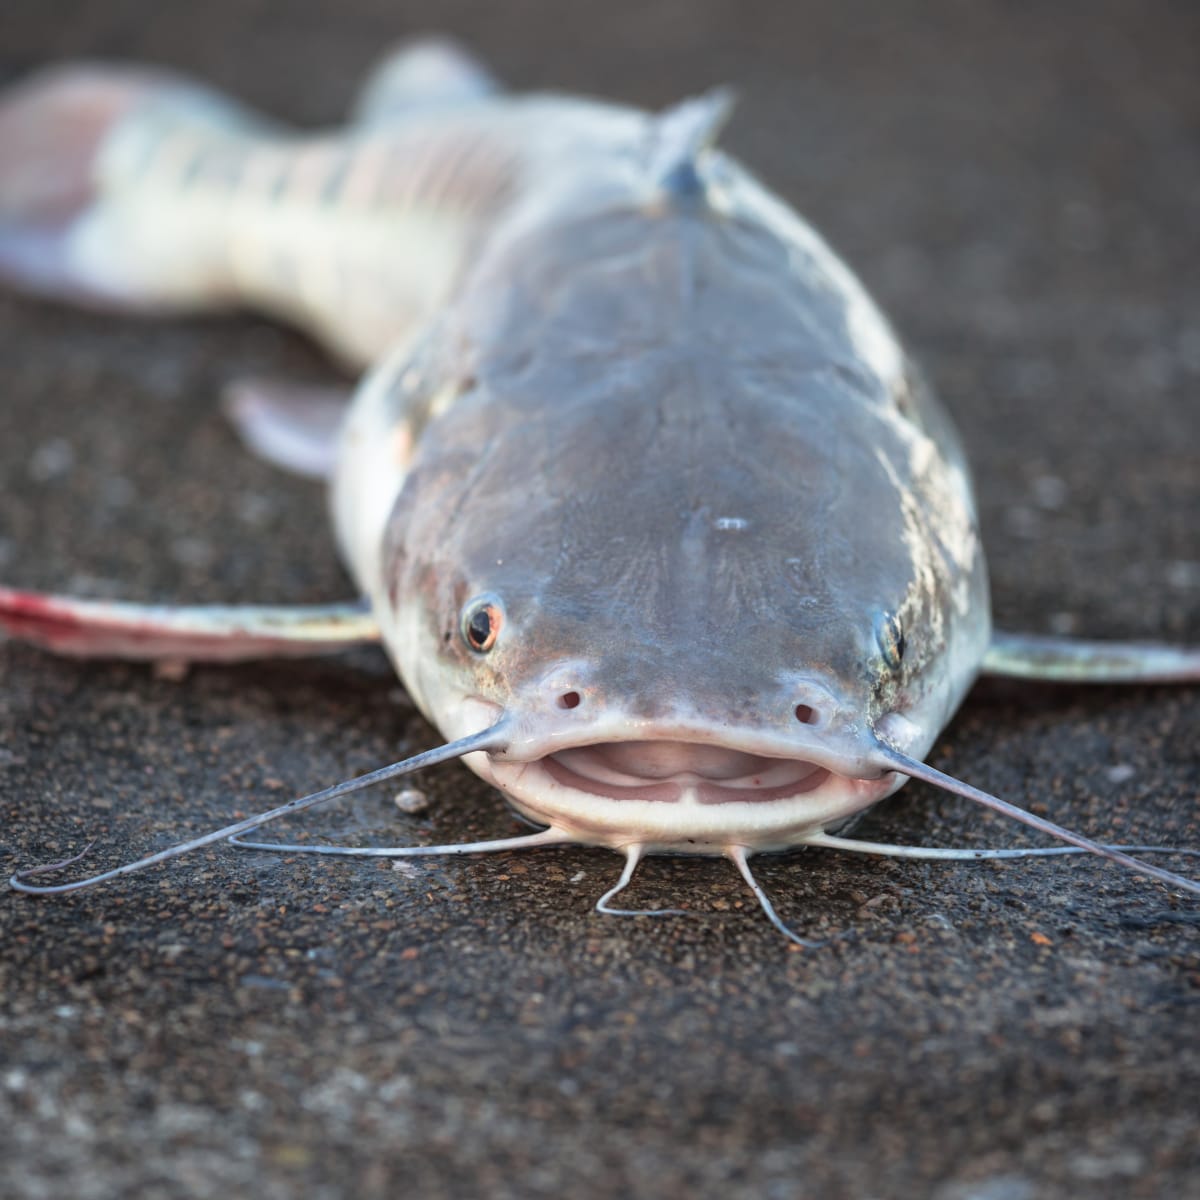 Zombie Catfish' Are Being Found in U.S. Waterways, Pointing to a